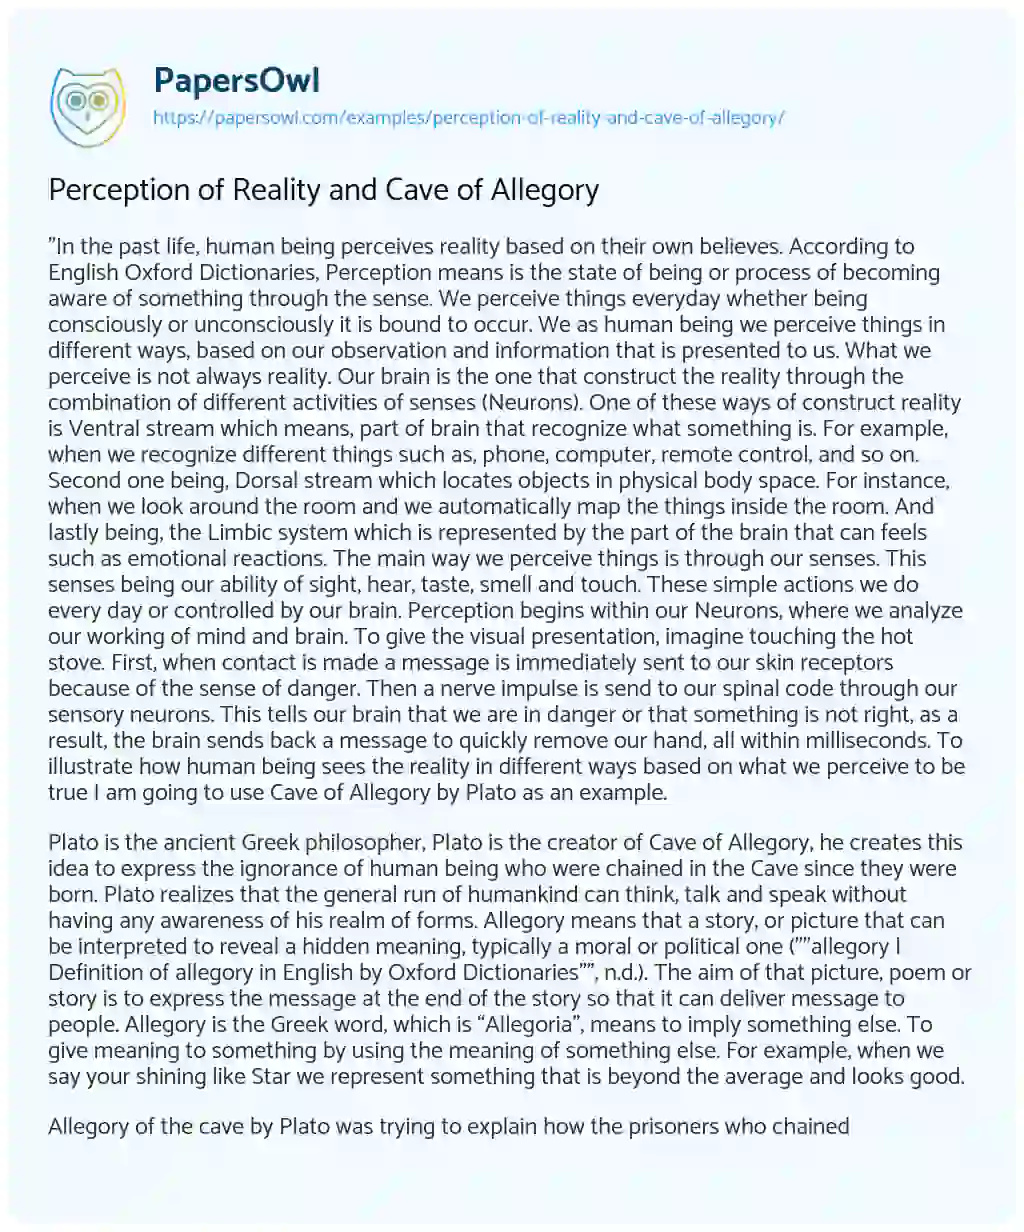 Essay on Perception of Reality and Cave of Allegory